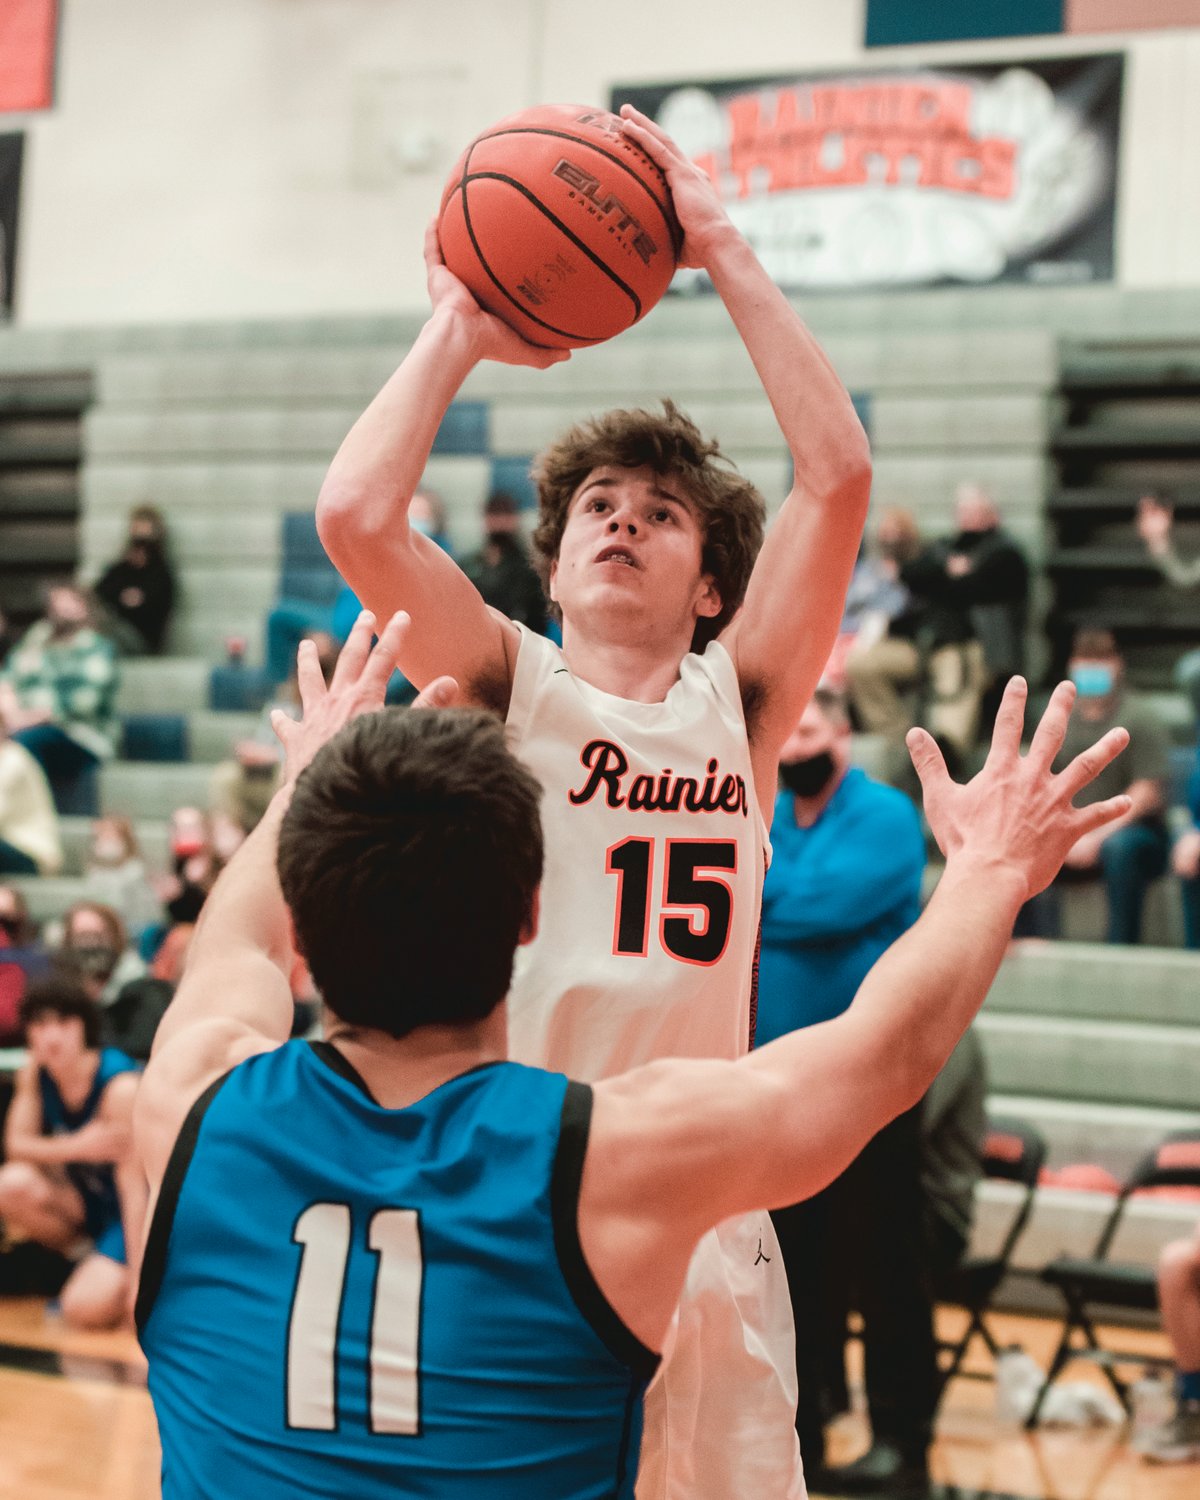 Rainier’s Jake Meldrum (15) looks to shoot during a game against Toutle Thursday night.